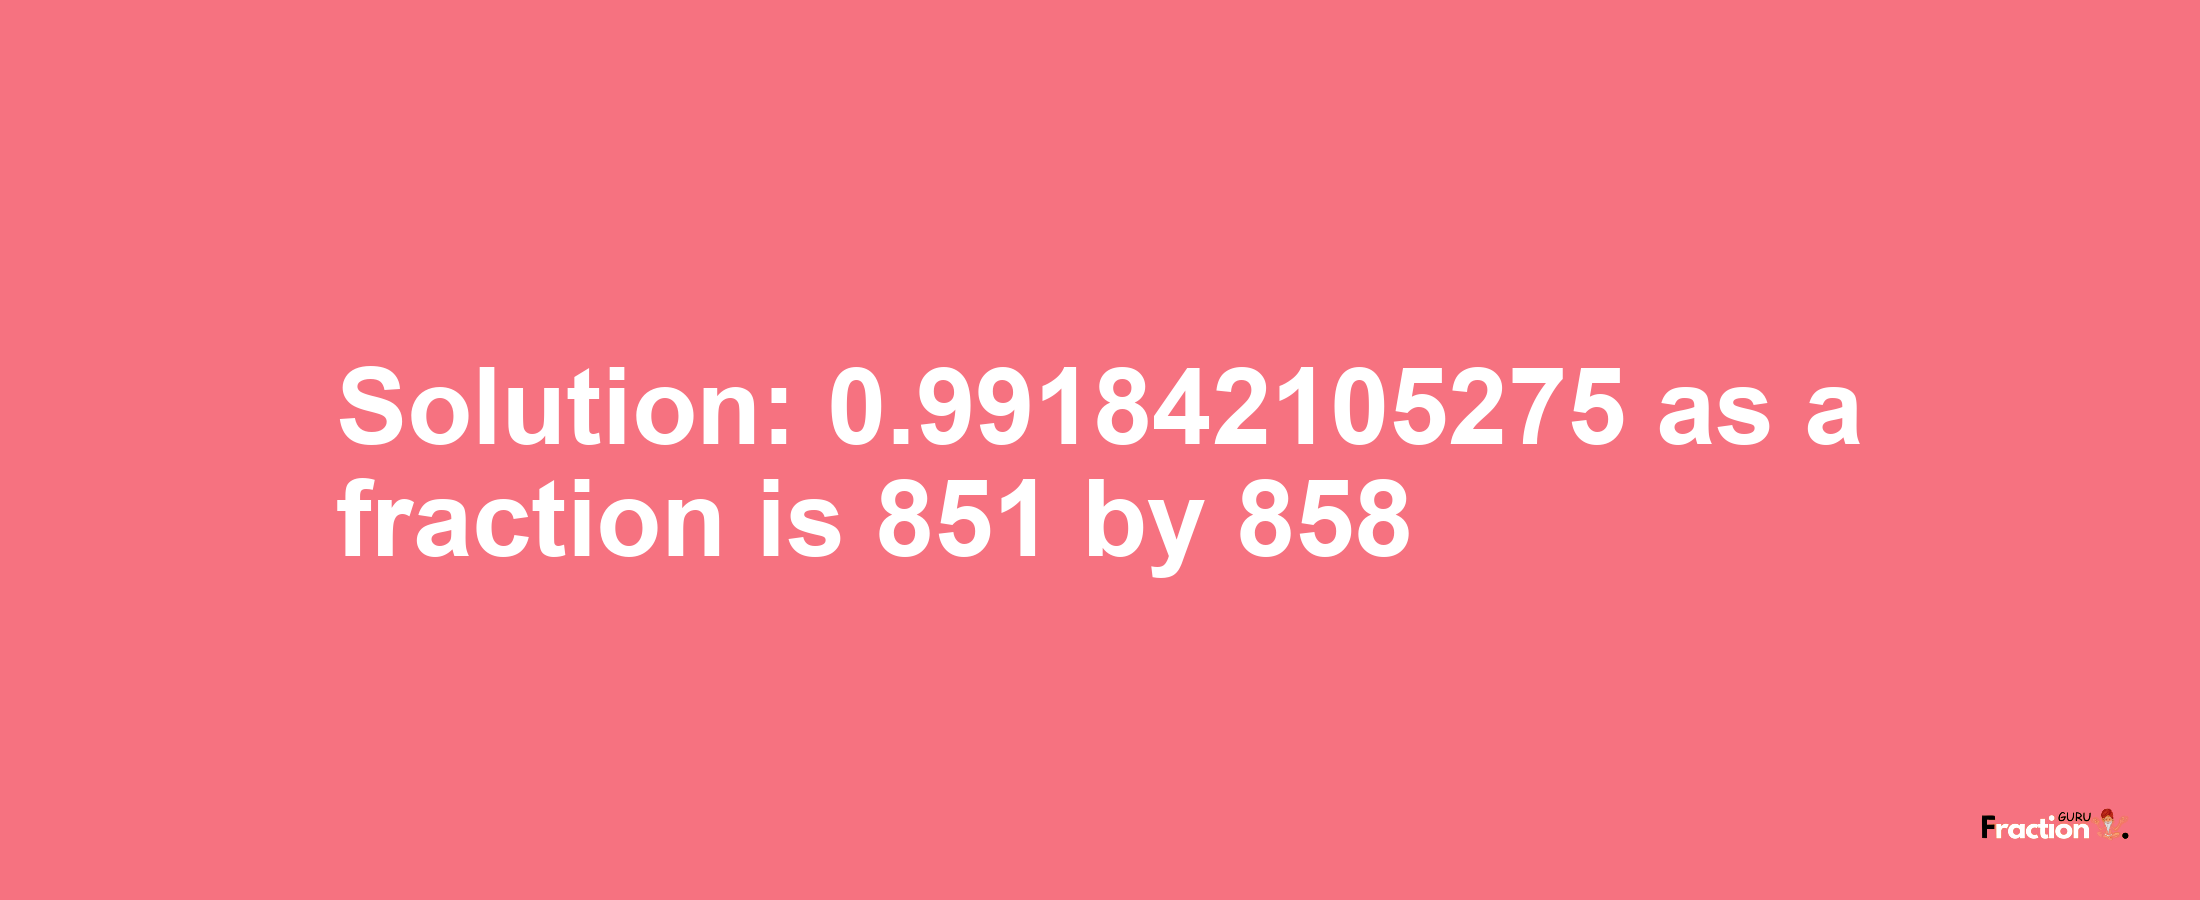 Solution:0.991842105275 as a fraction is 851/858